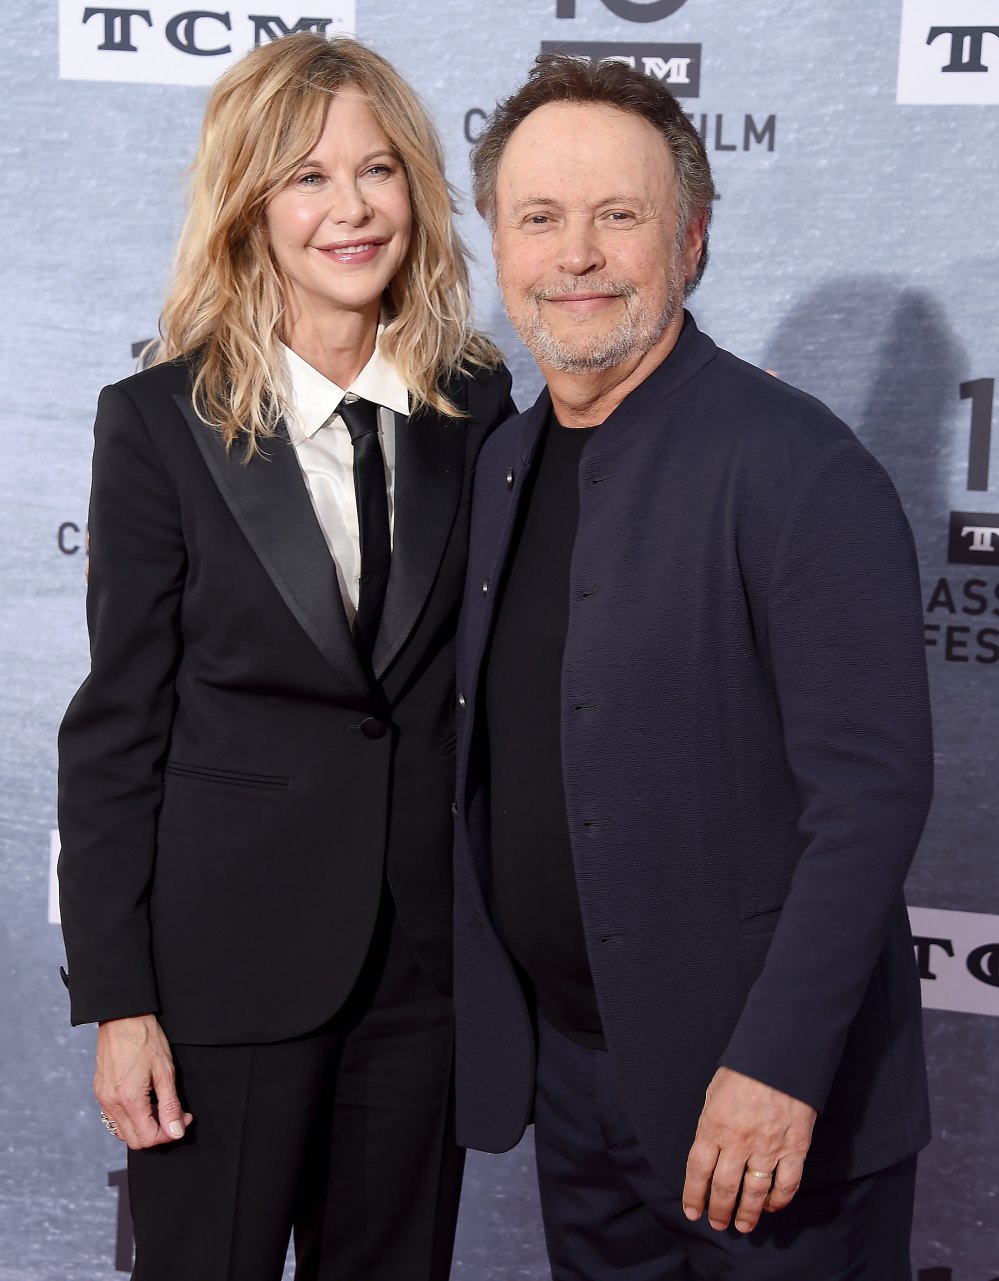 2019 TCM Classic Film Festival Opening Night Gala And 30th Anniversary Screening Of "When Harry Met Sally" - Arrivals, Meg Ryan Billy Crystal